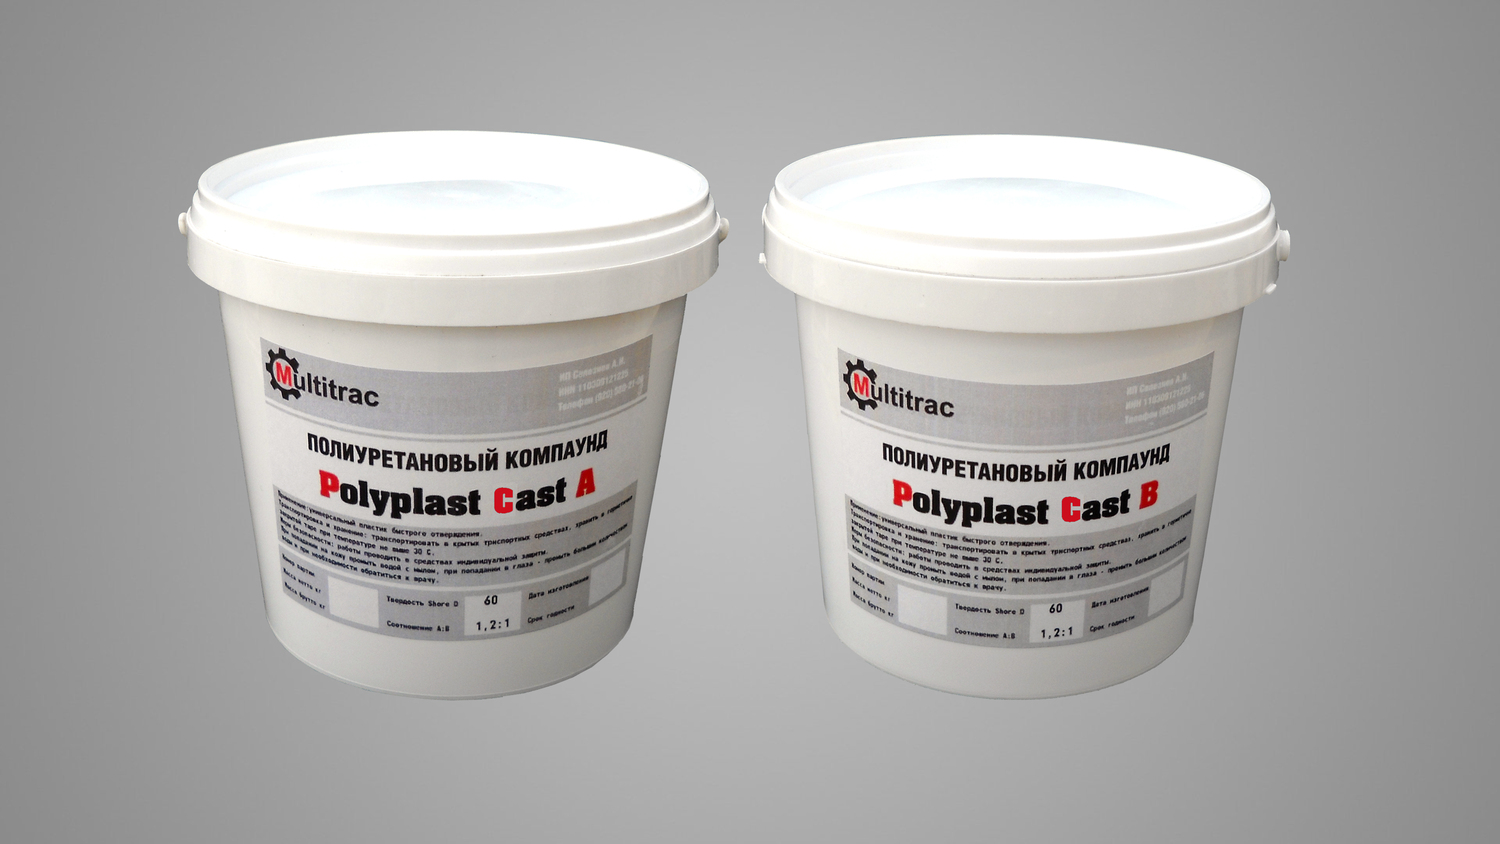 <span style="font-weight: bold;">Polyplast Cast</span>